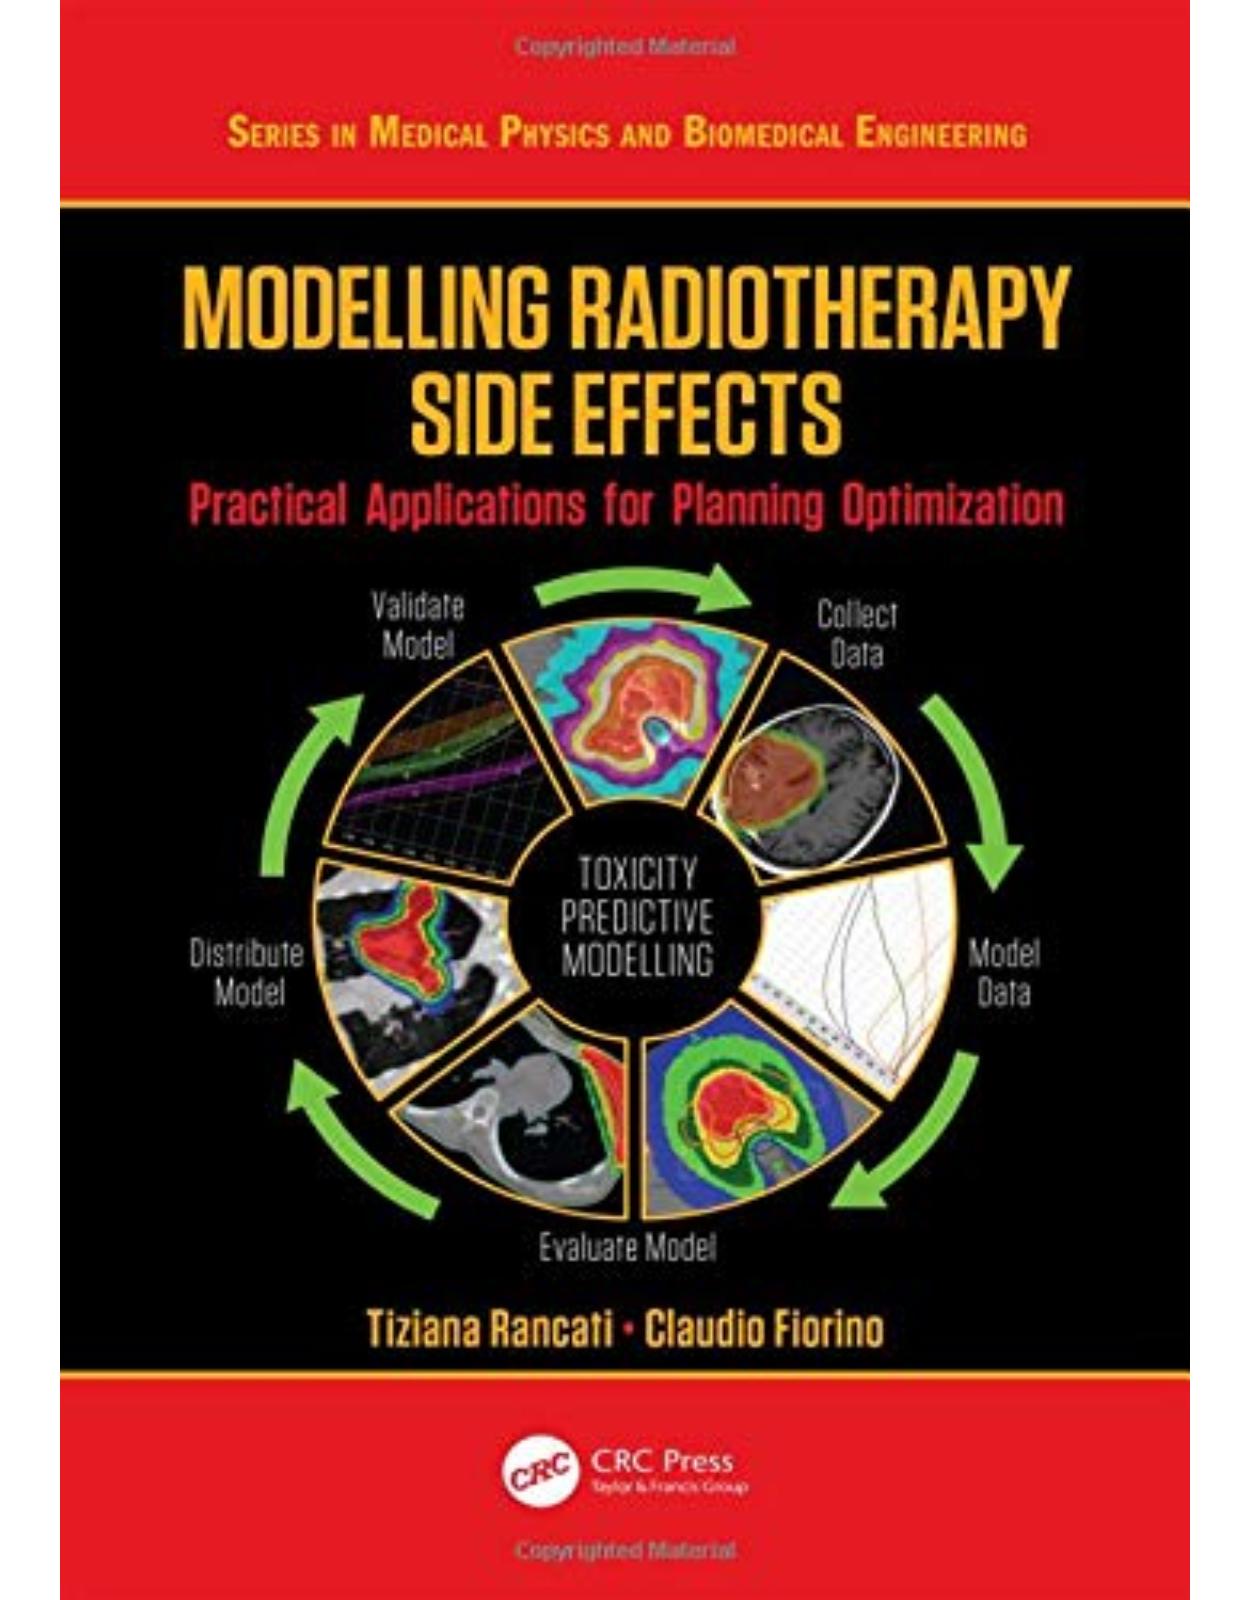 Modelling Radiotherapy Side Effects. Practical Applications for Planning Optimisation